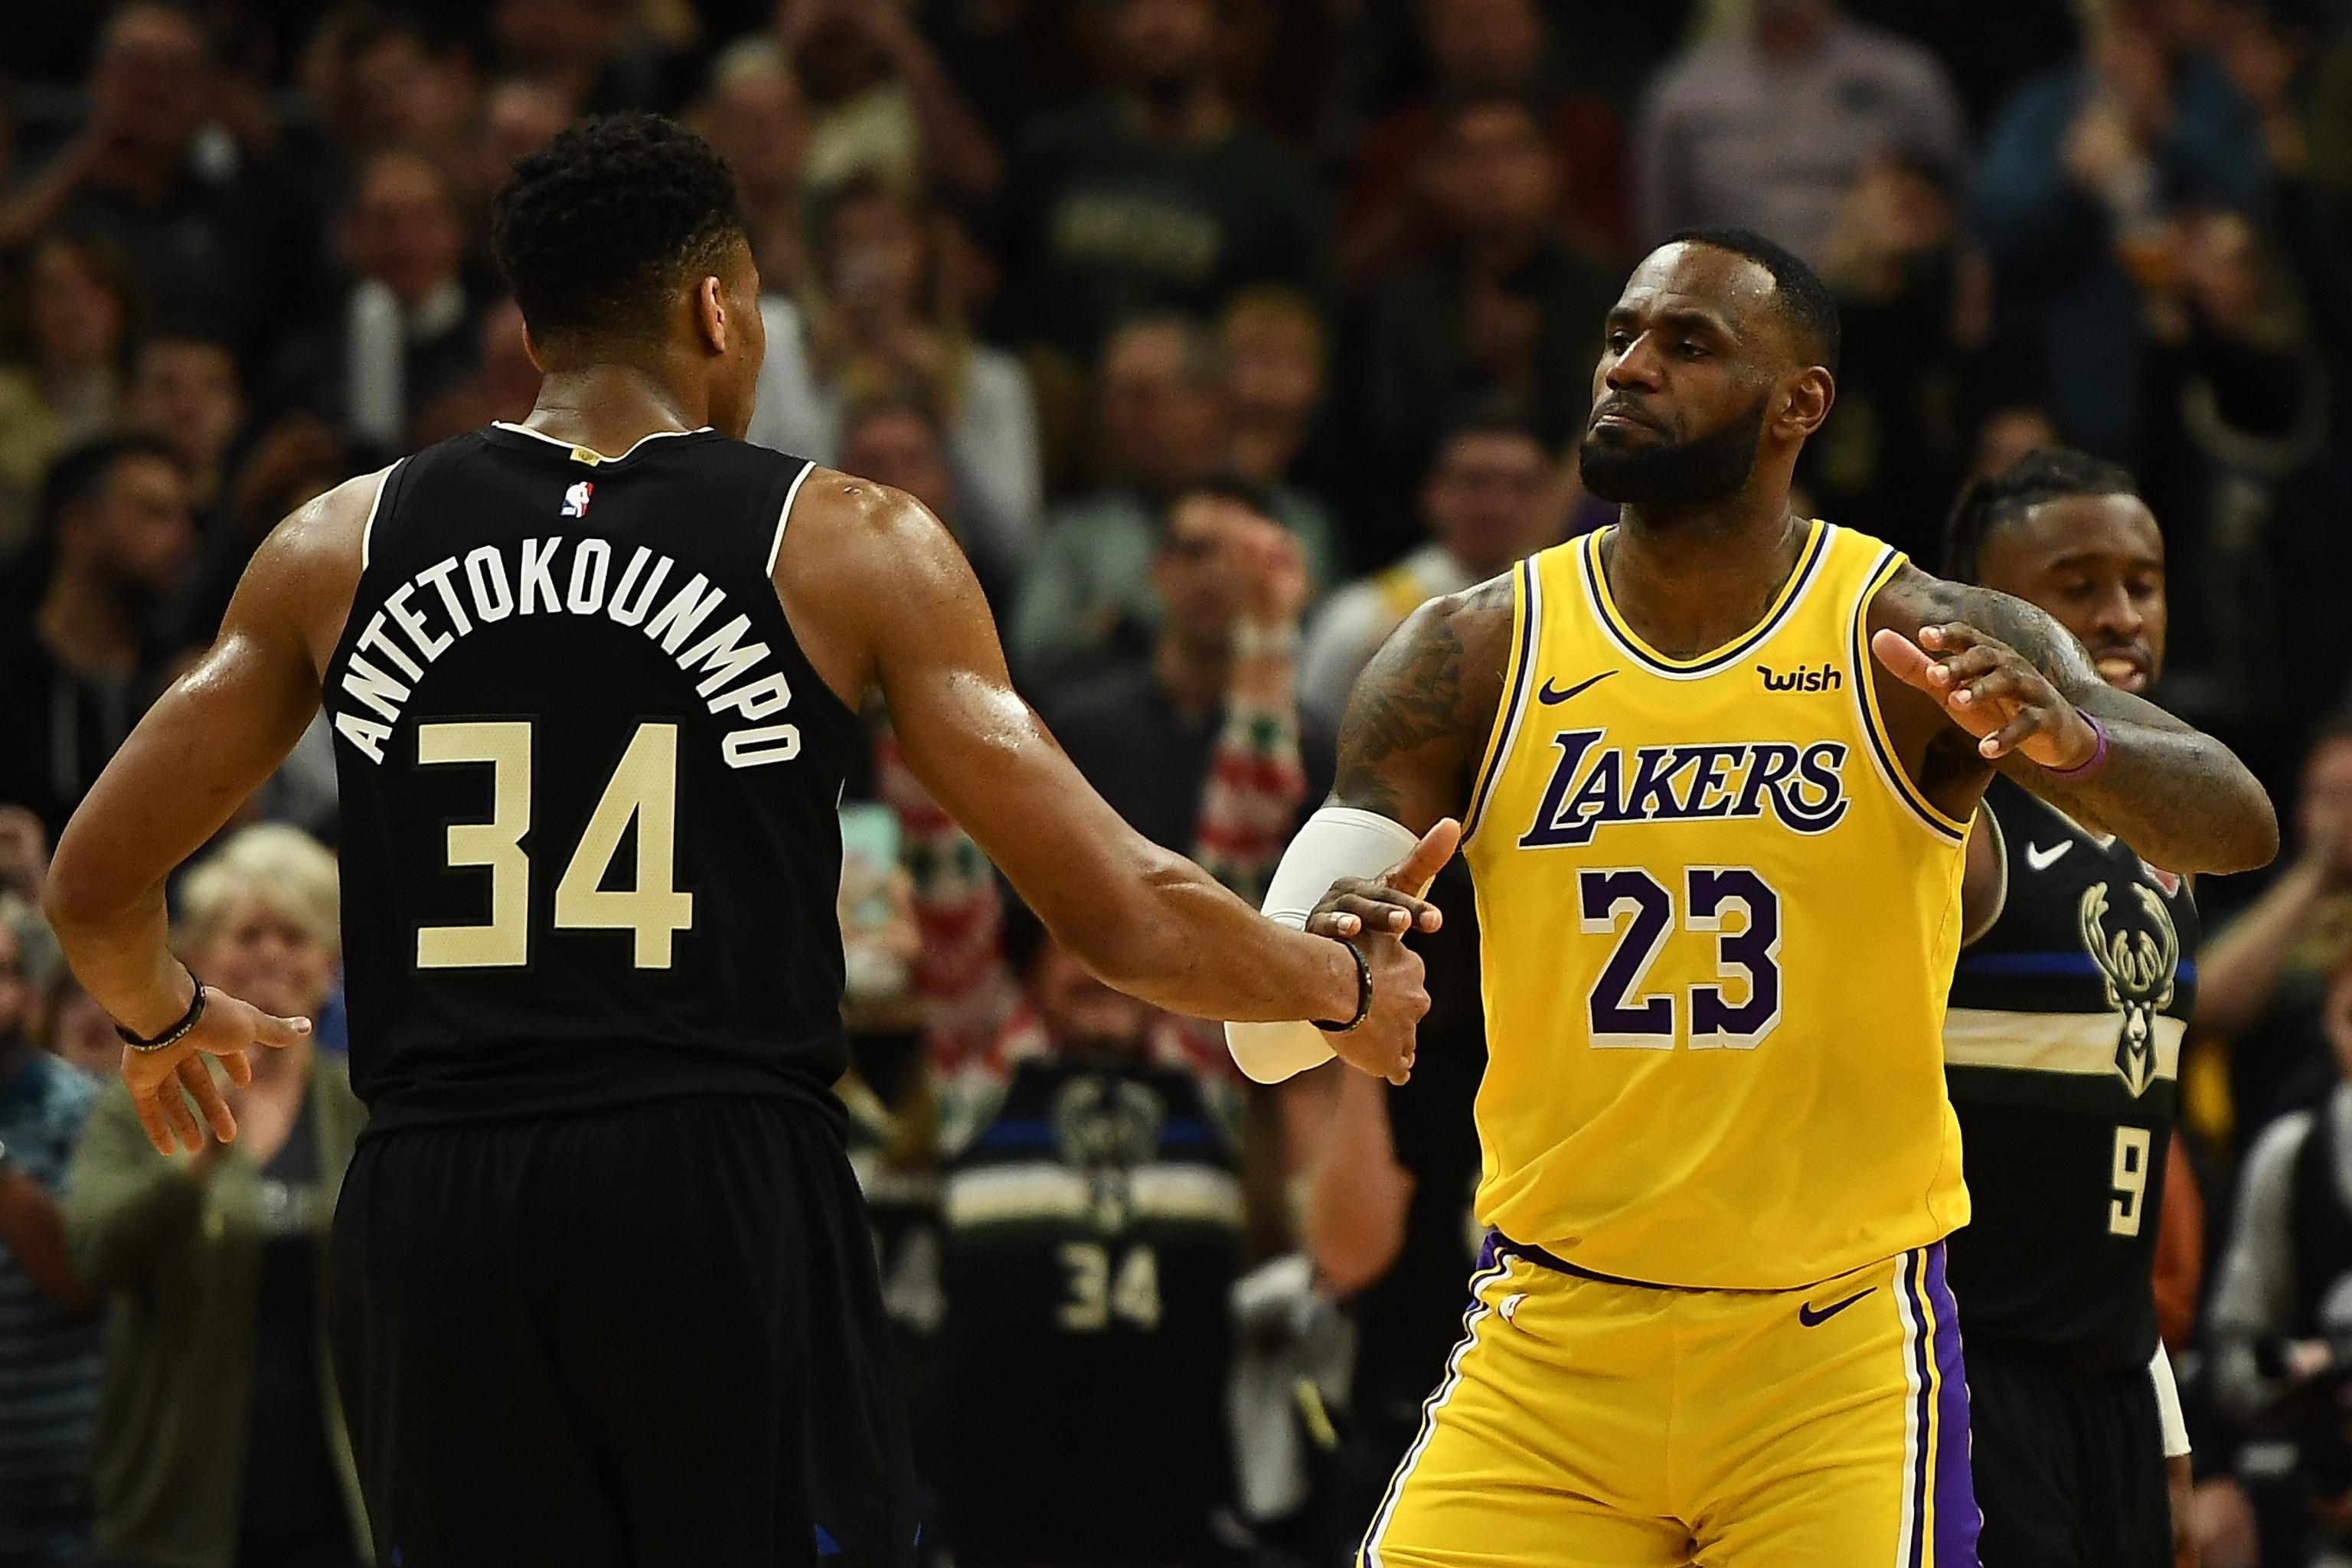 NBA All-Star Draft results 2020: Picks, rosters for Team LeBron